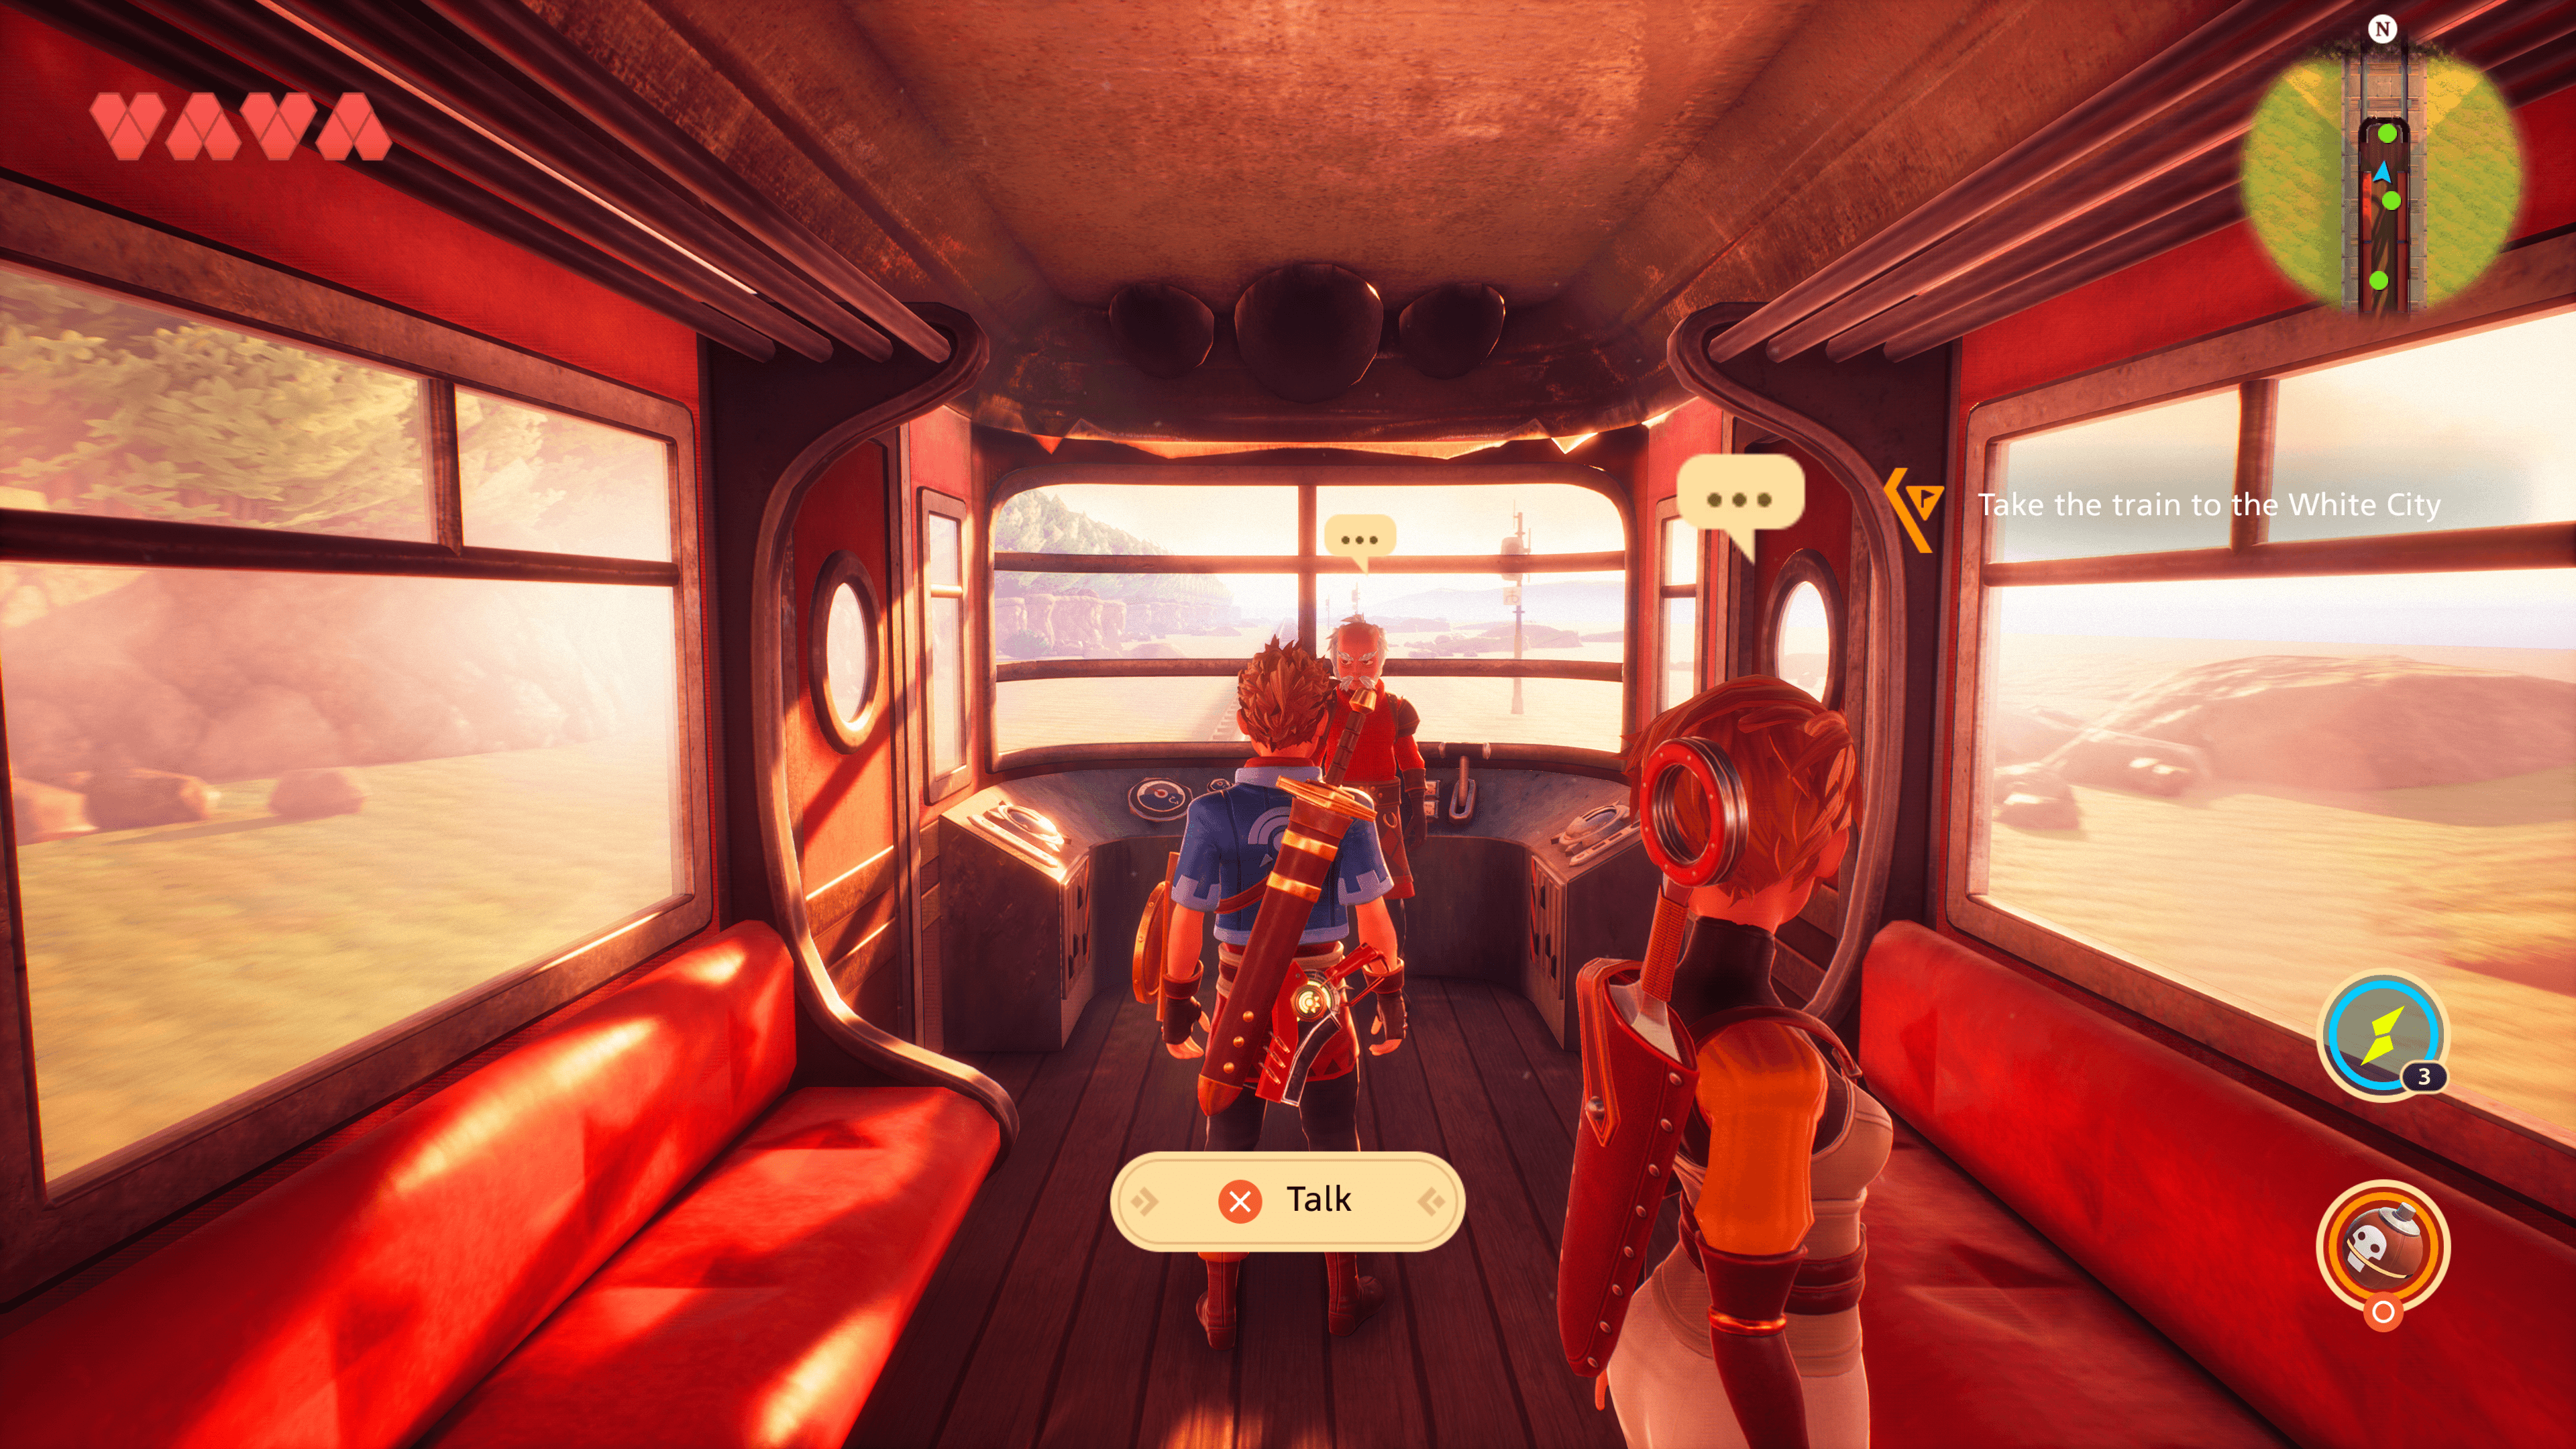 3 characters stand on a train carriage as it travels through a rocky desert area. The carriage is decorated with red leather style seating and large windows that have blaring sun shining through them. 2 of the characters have speech bubbles above their heads with an interact prompt behind the main character prompting players to press X to Talk.